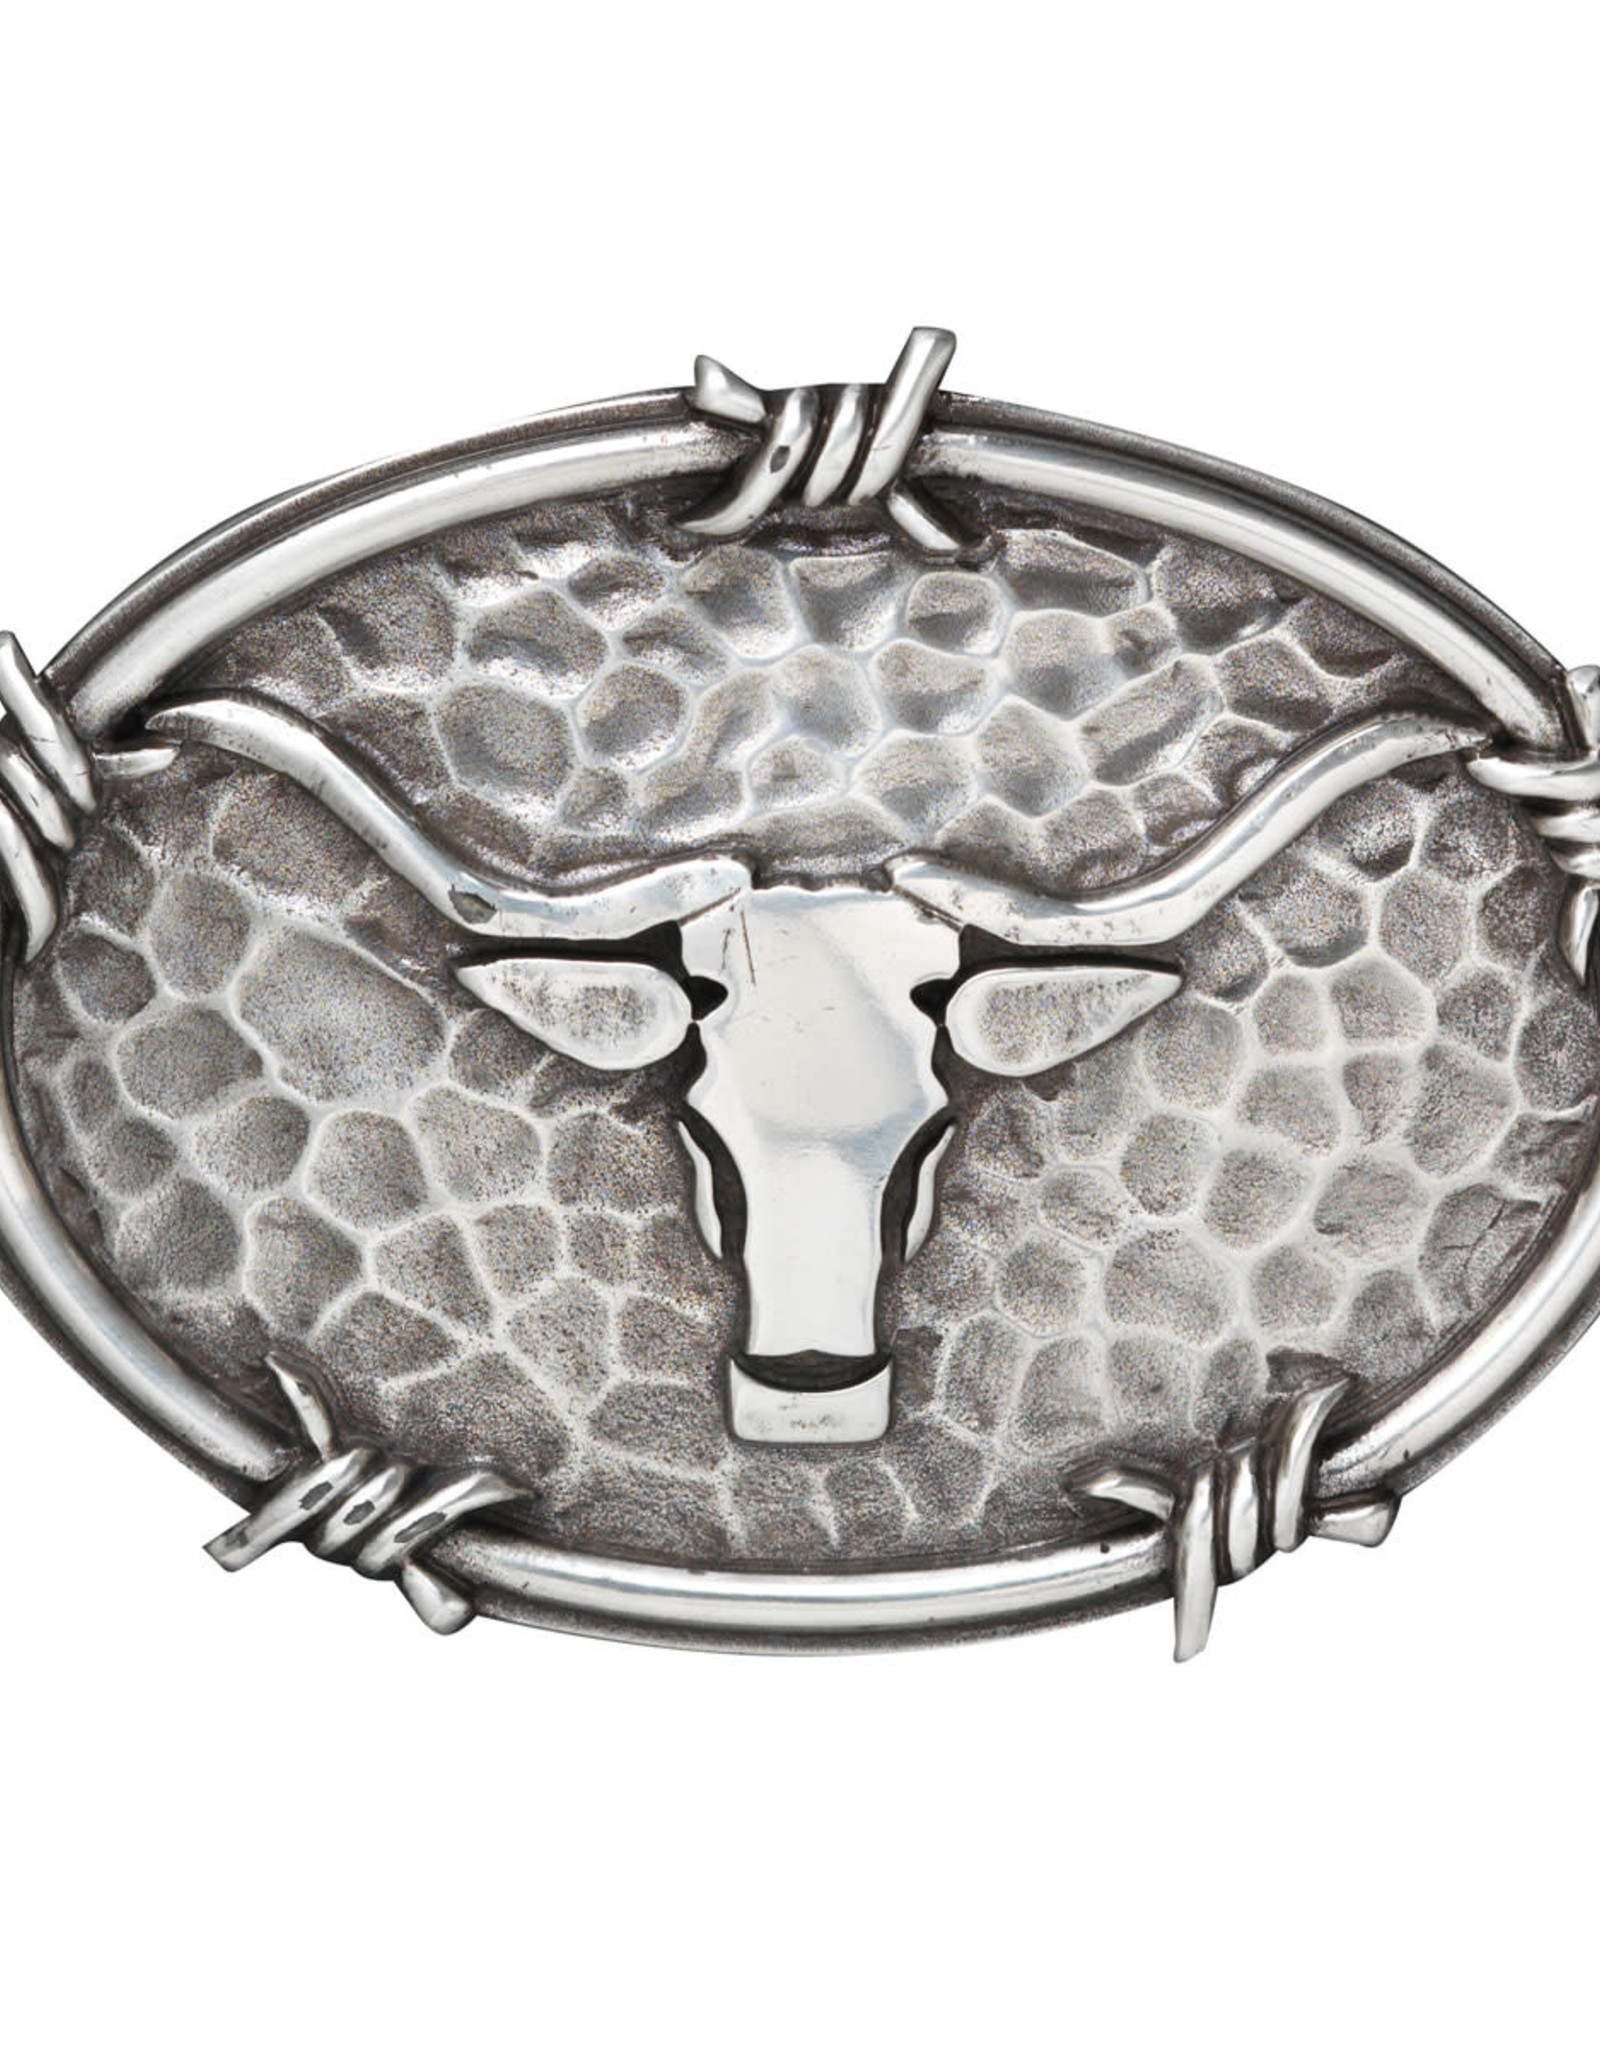 Ariat Oval Hammered Silver Long Horn Steer Barbwire Edge Belt Buckle